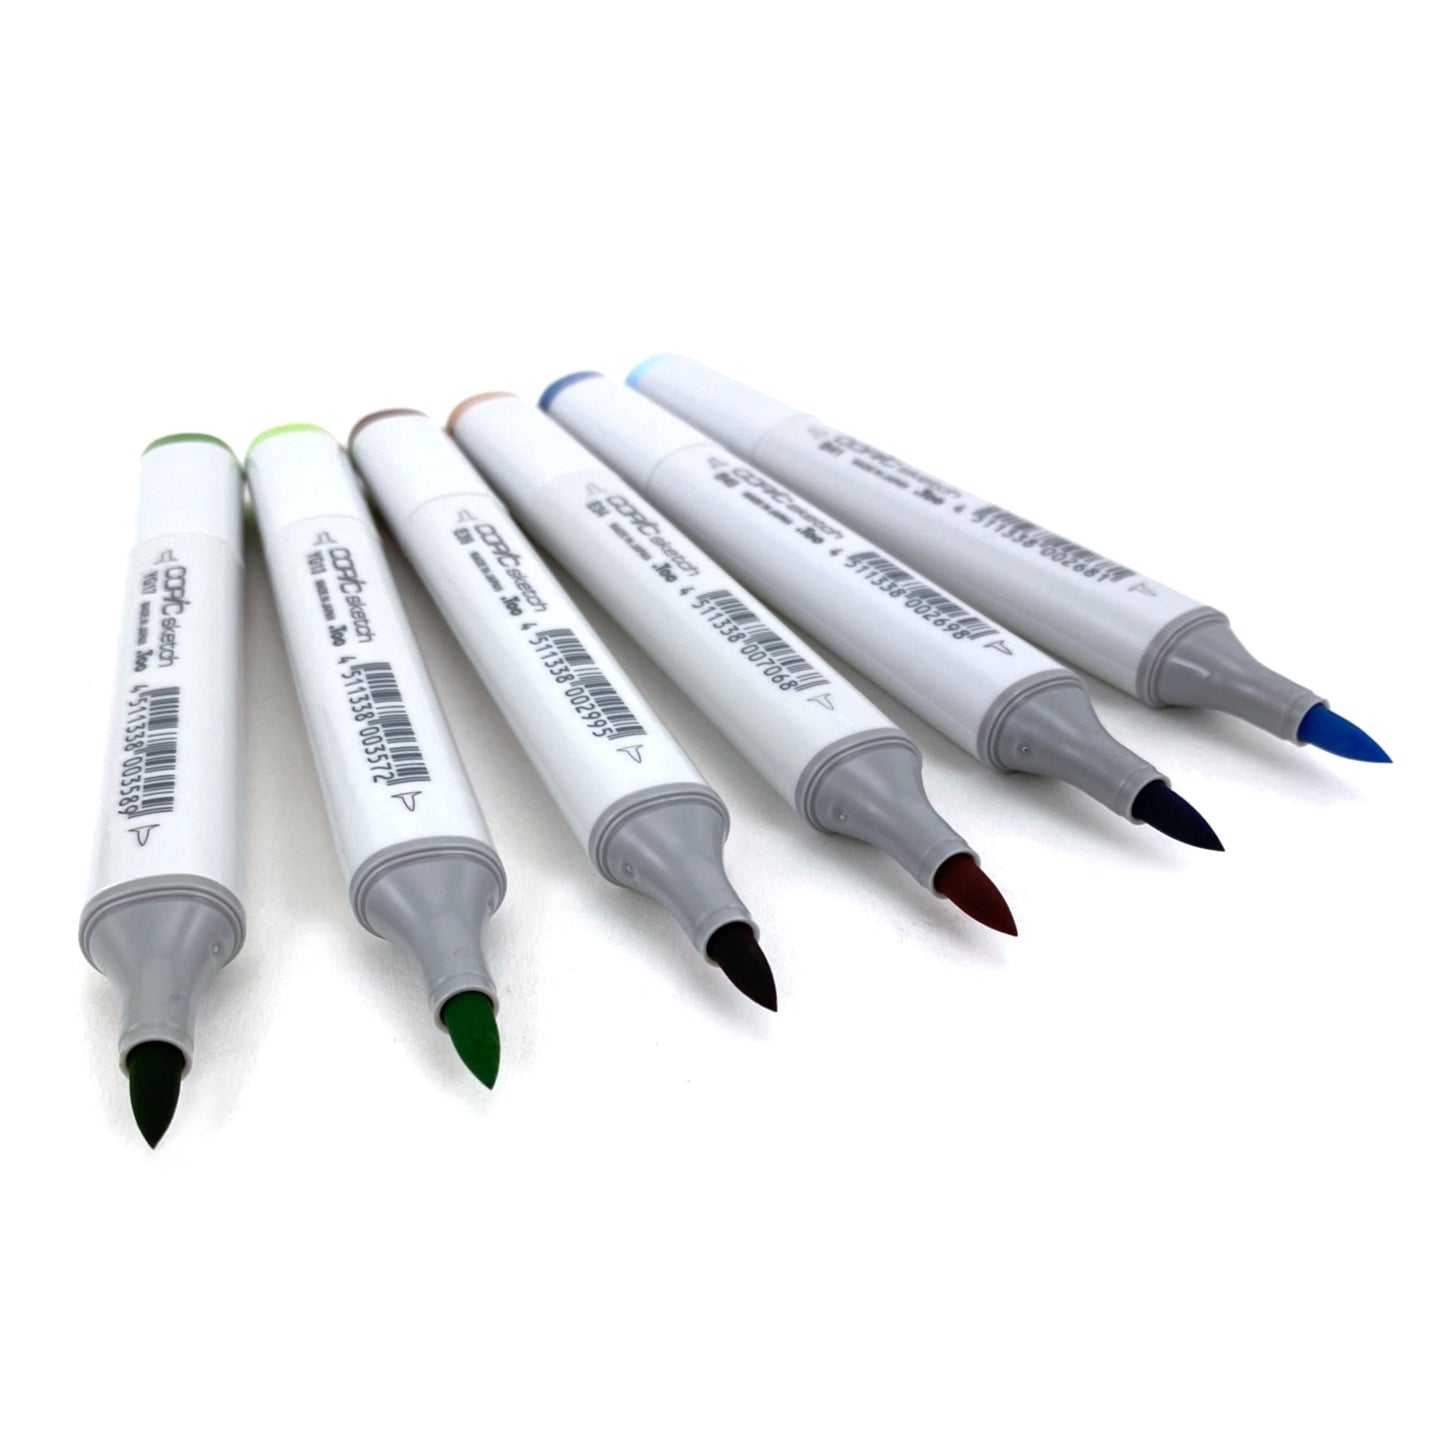 Copic Sketch Markers - Set of 6 - by Copic - K. A. Artist Shop